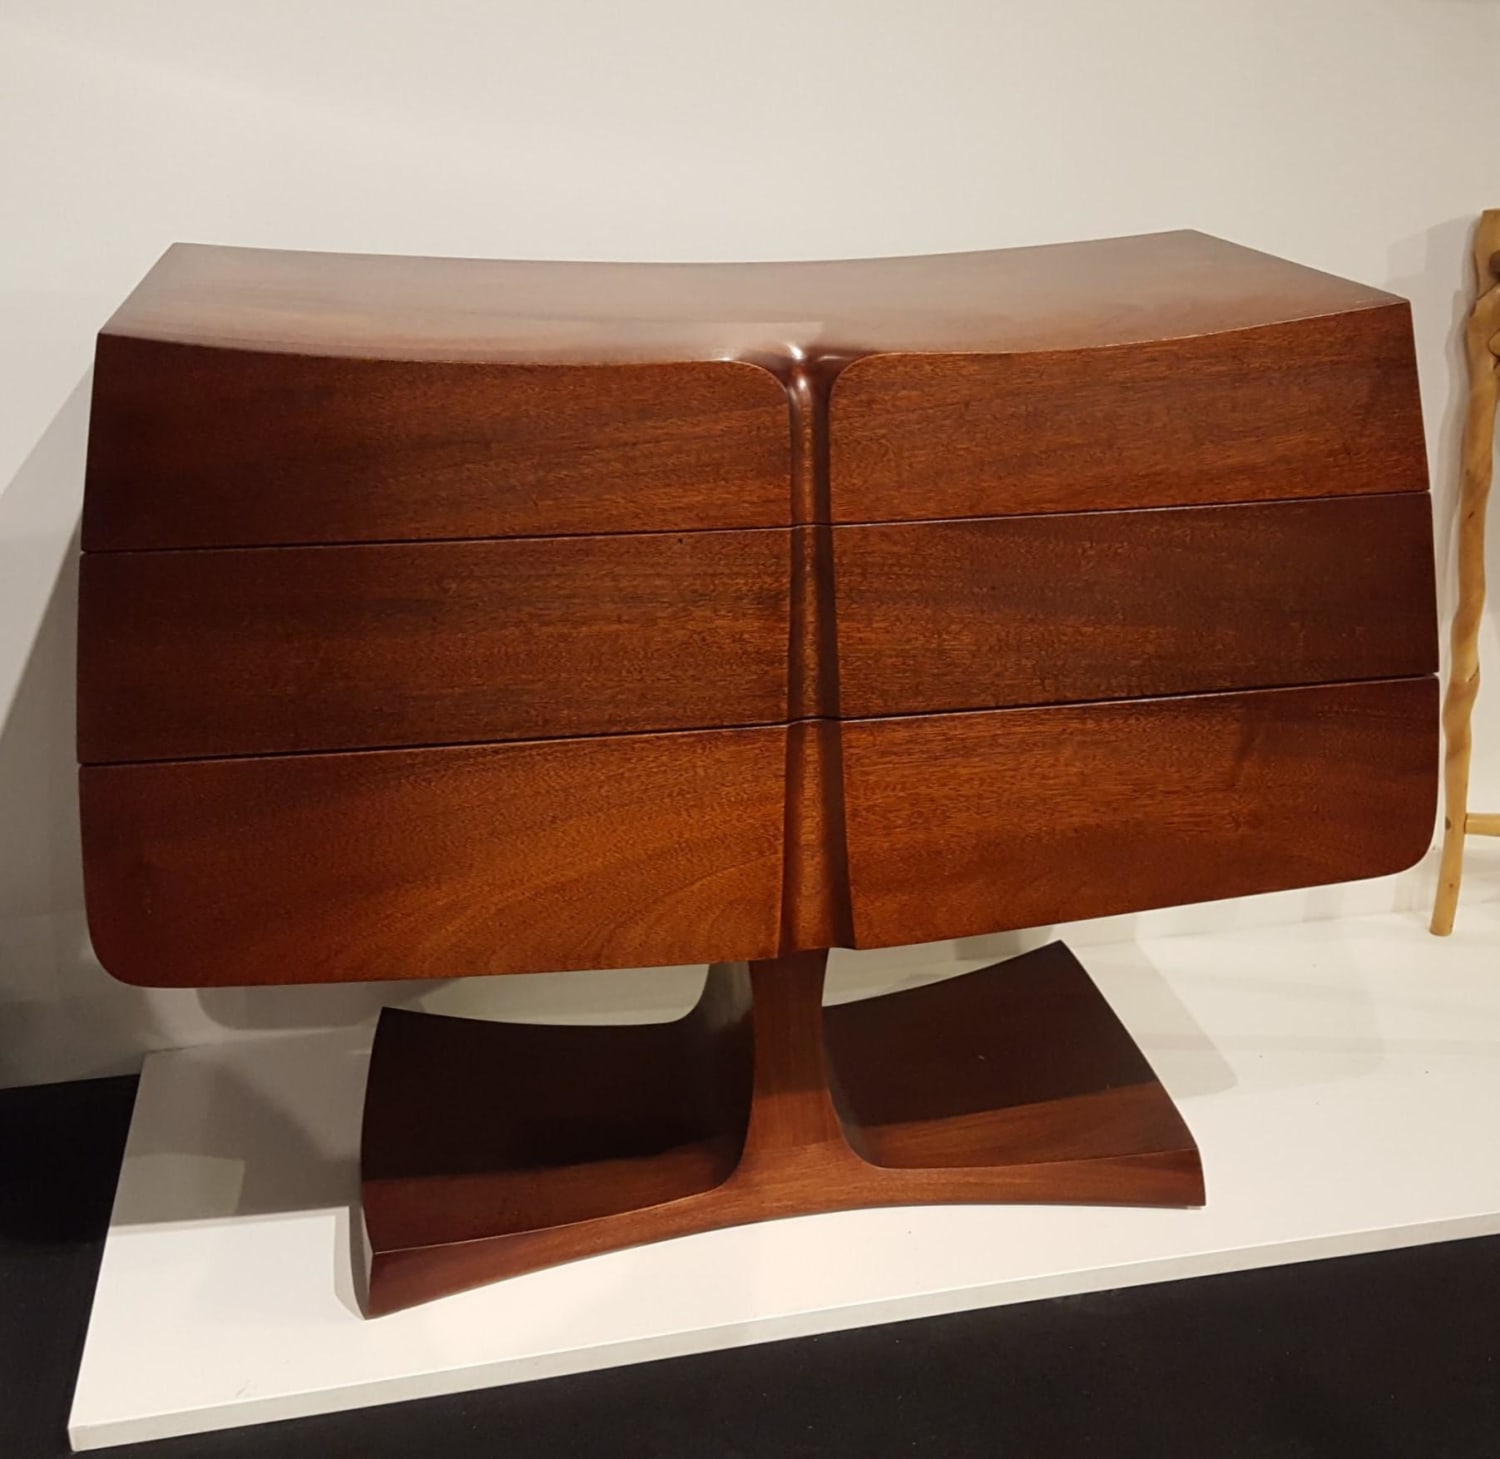 David Ebner / “Low Chest of Drawers”, American Black Walnut / 1981 on view at Moderne Gallery at Design Miami 2017